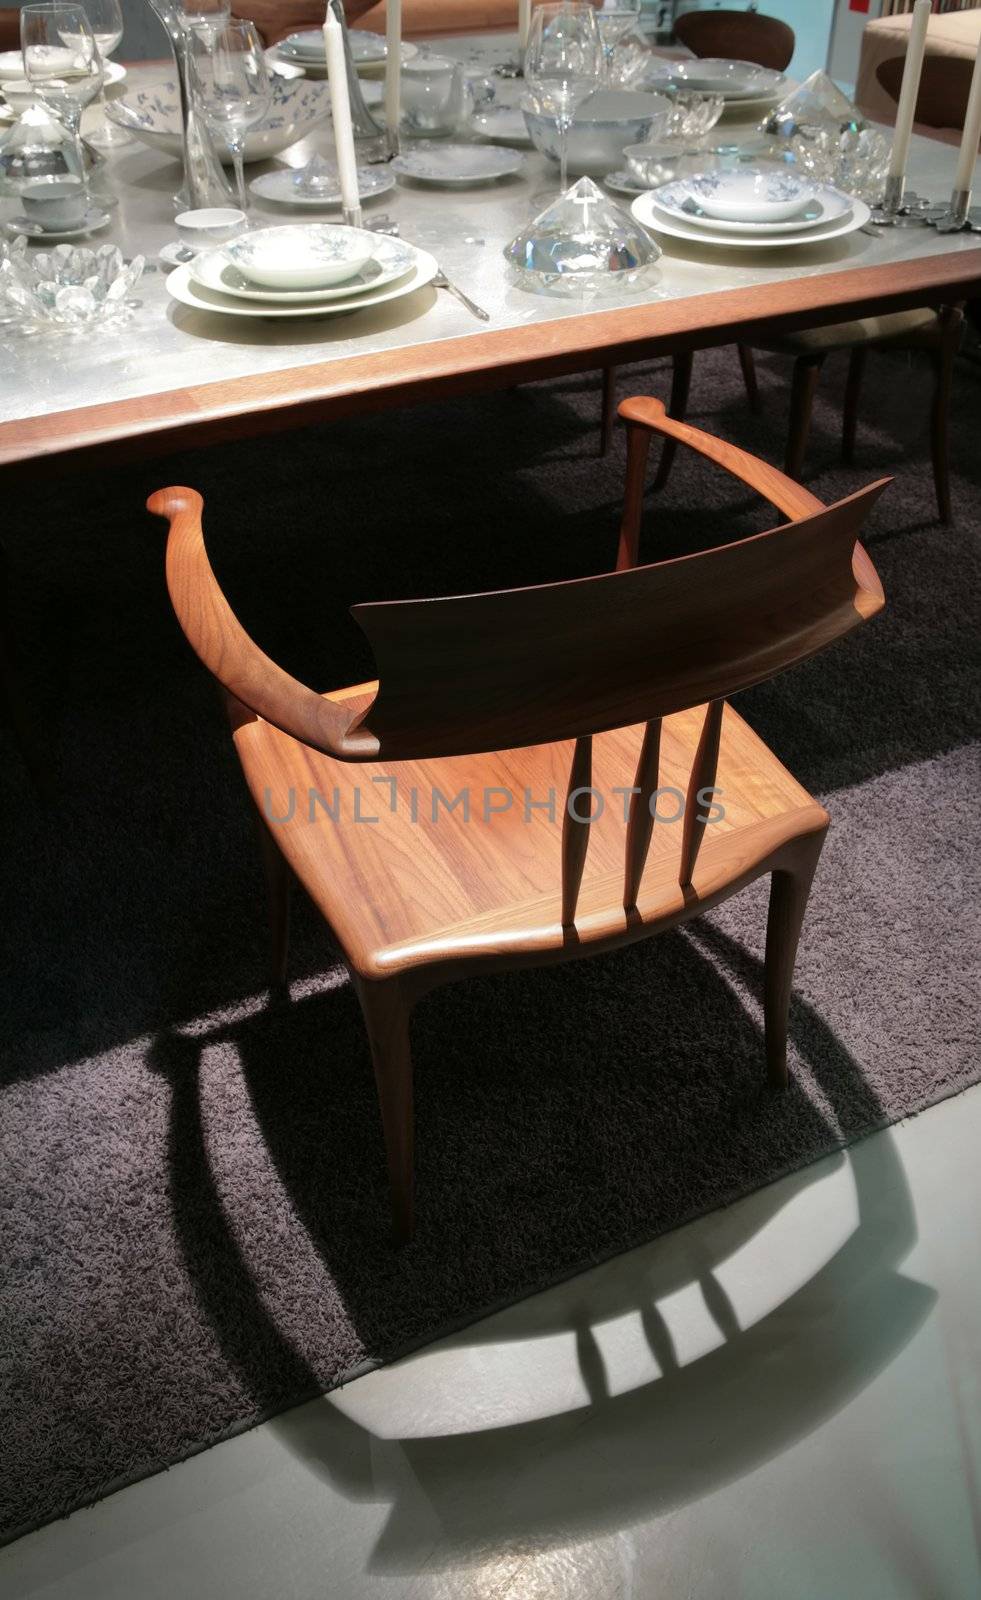 wooden chair and its shade around set table